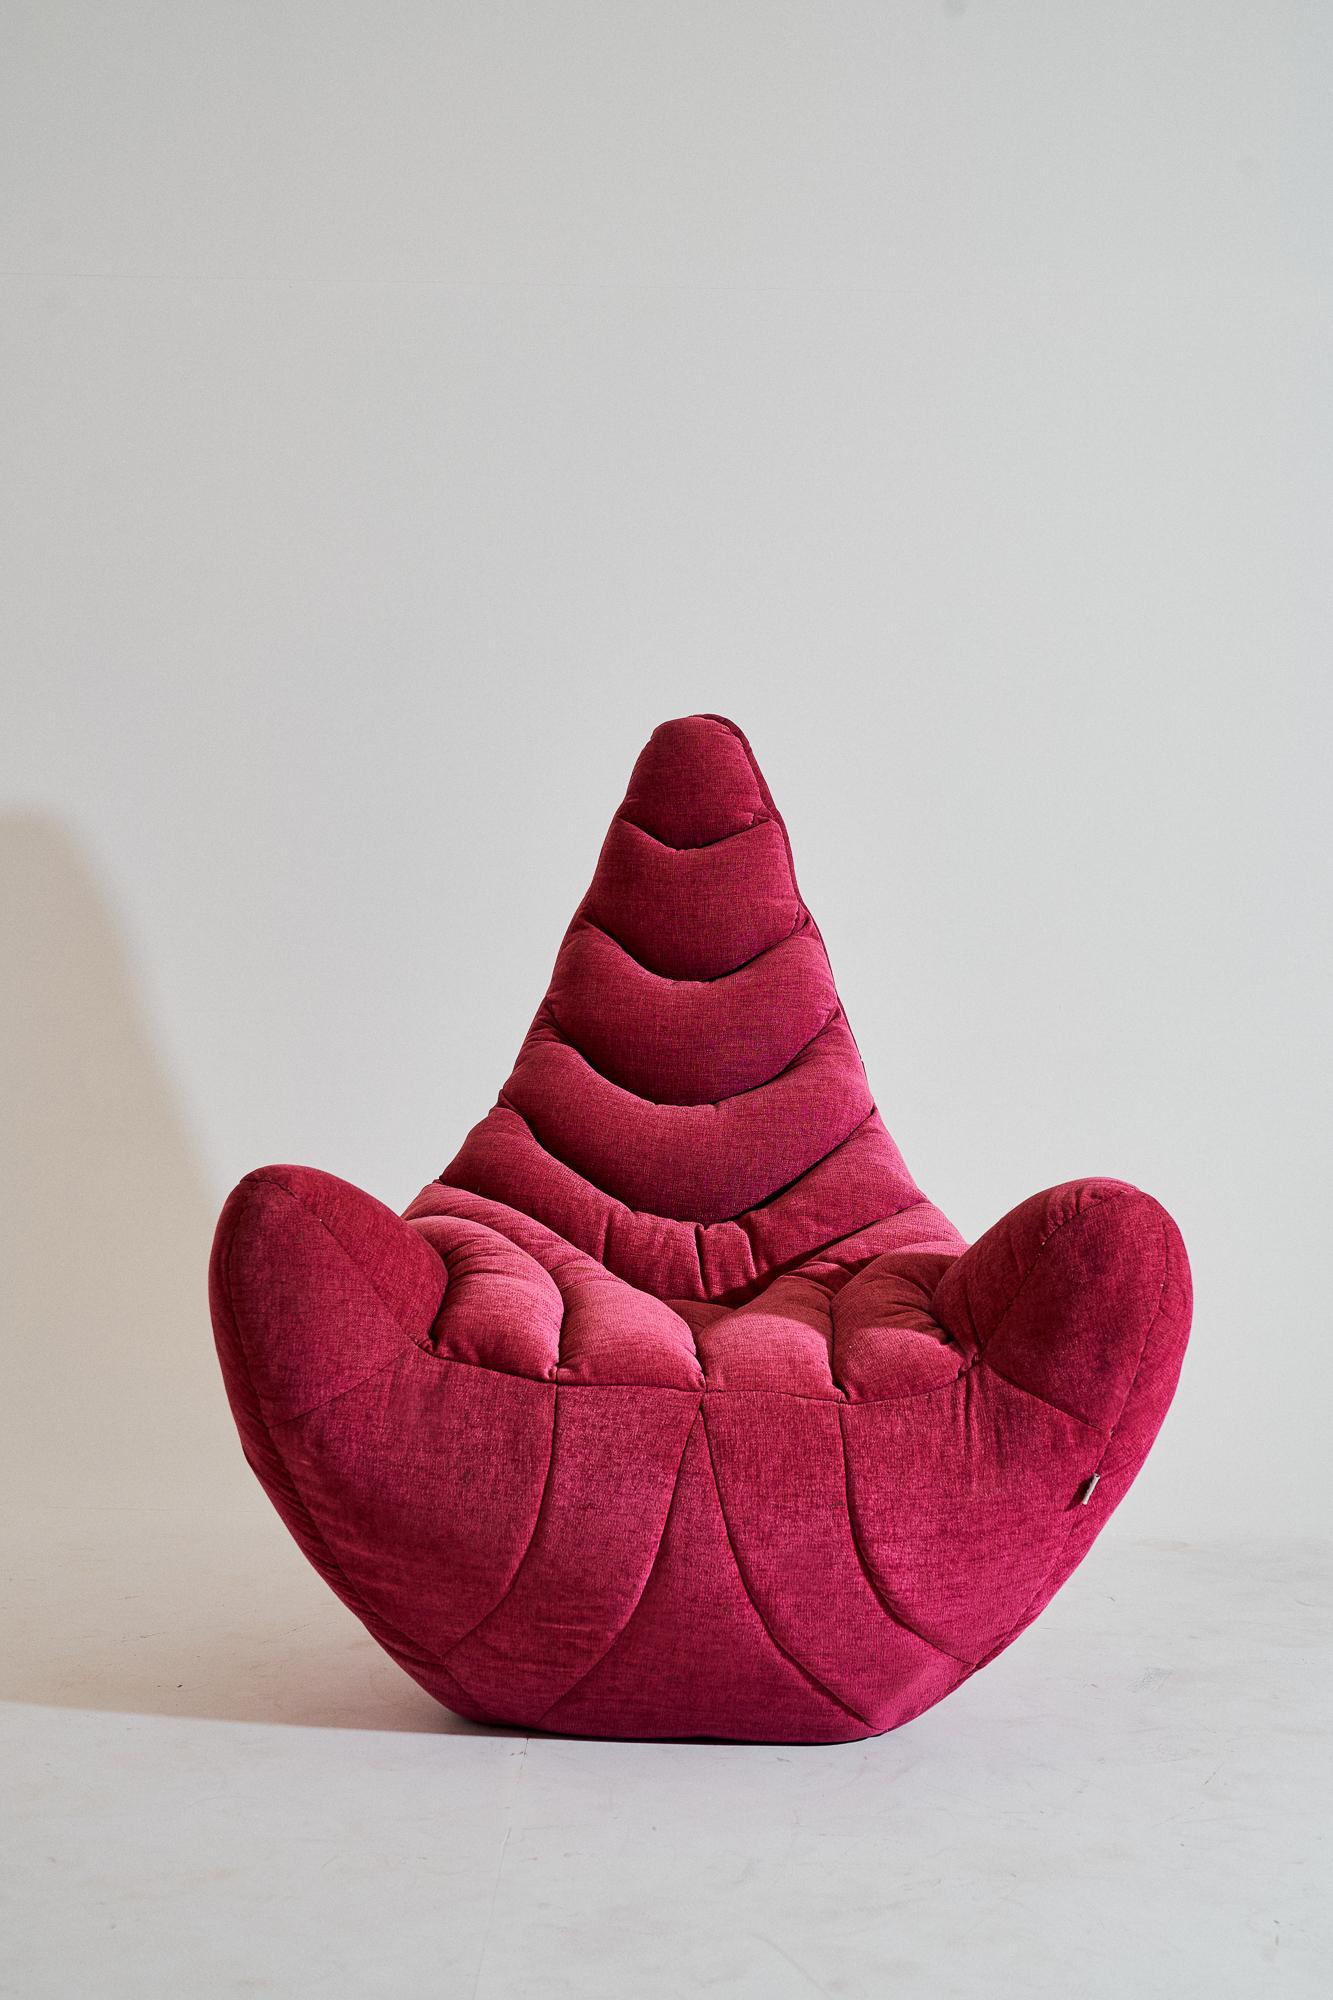 Contemporary, upholstered fiberglass armchair - Popcorn Armchair by Kunaal Kyhaan. The sensual form, is imagined in a royal pink plush upholstered form. Layers of fiber are hand moulded by traditional sculpture artisans and perfectly shaped to